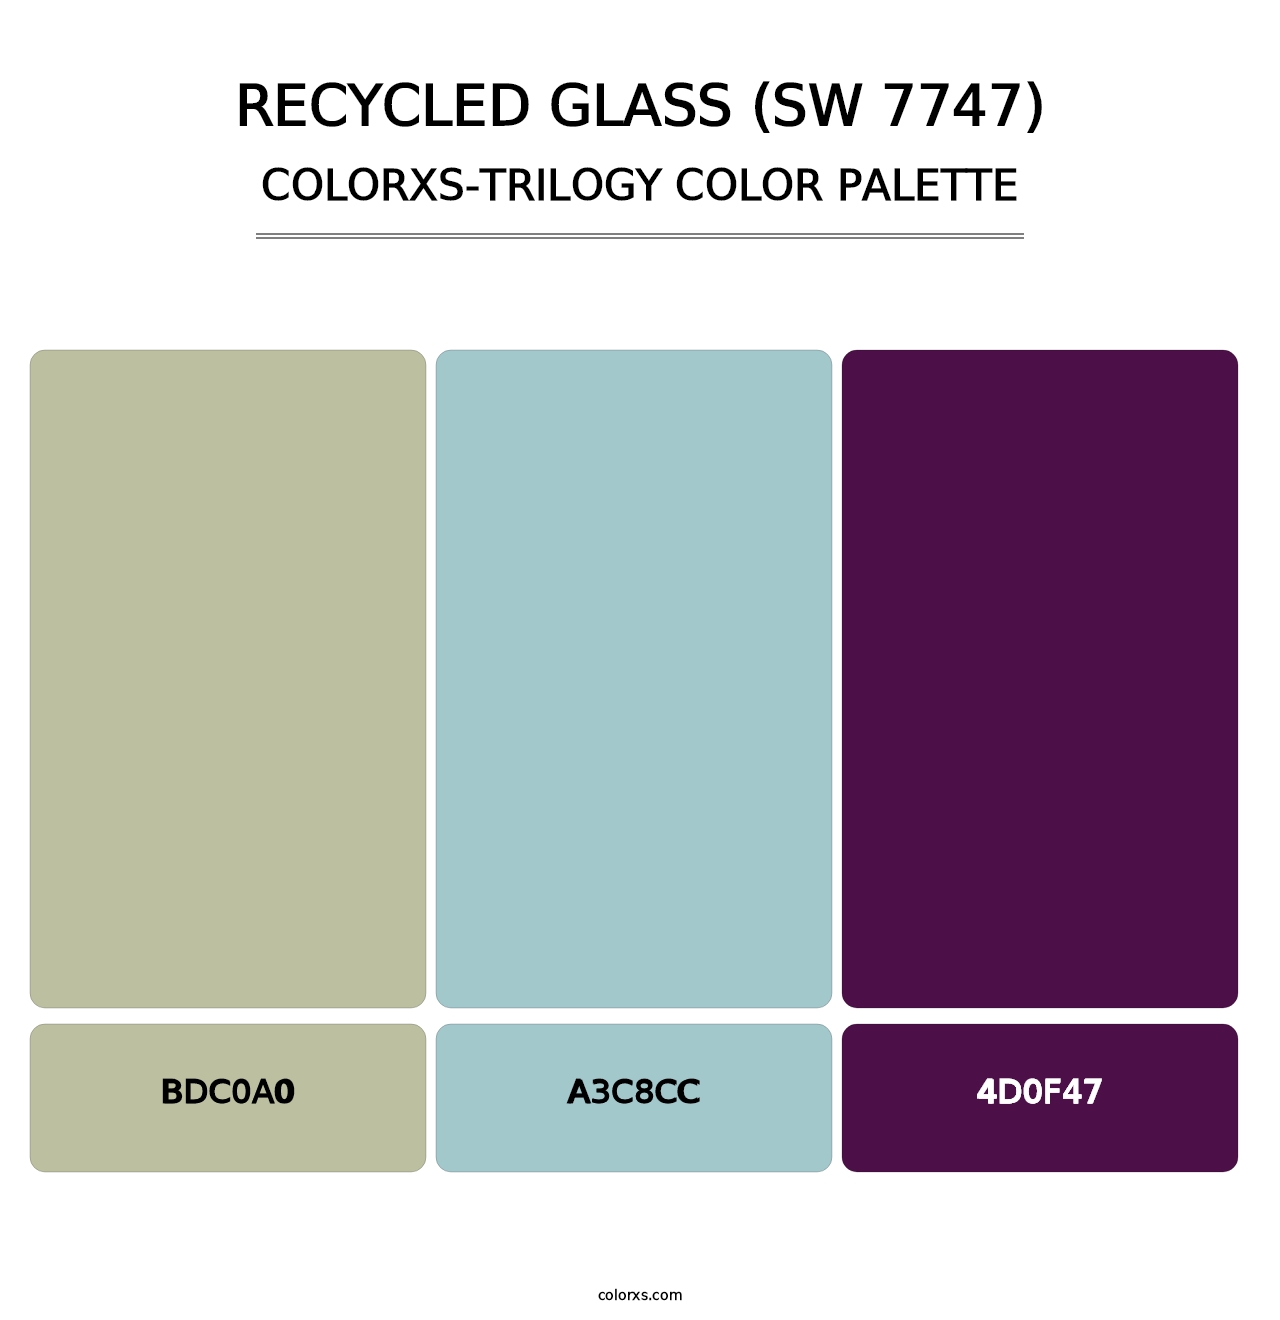 Recycled Glass (SW 7747) - Colorxs Trilogy Palette